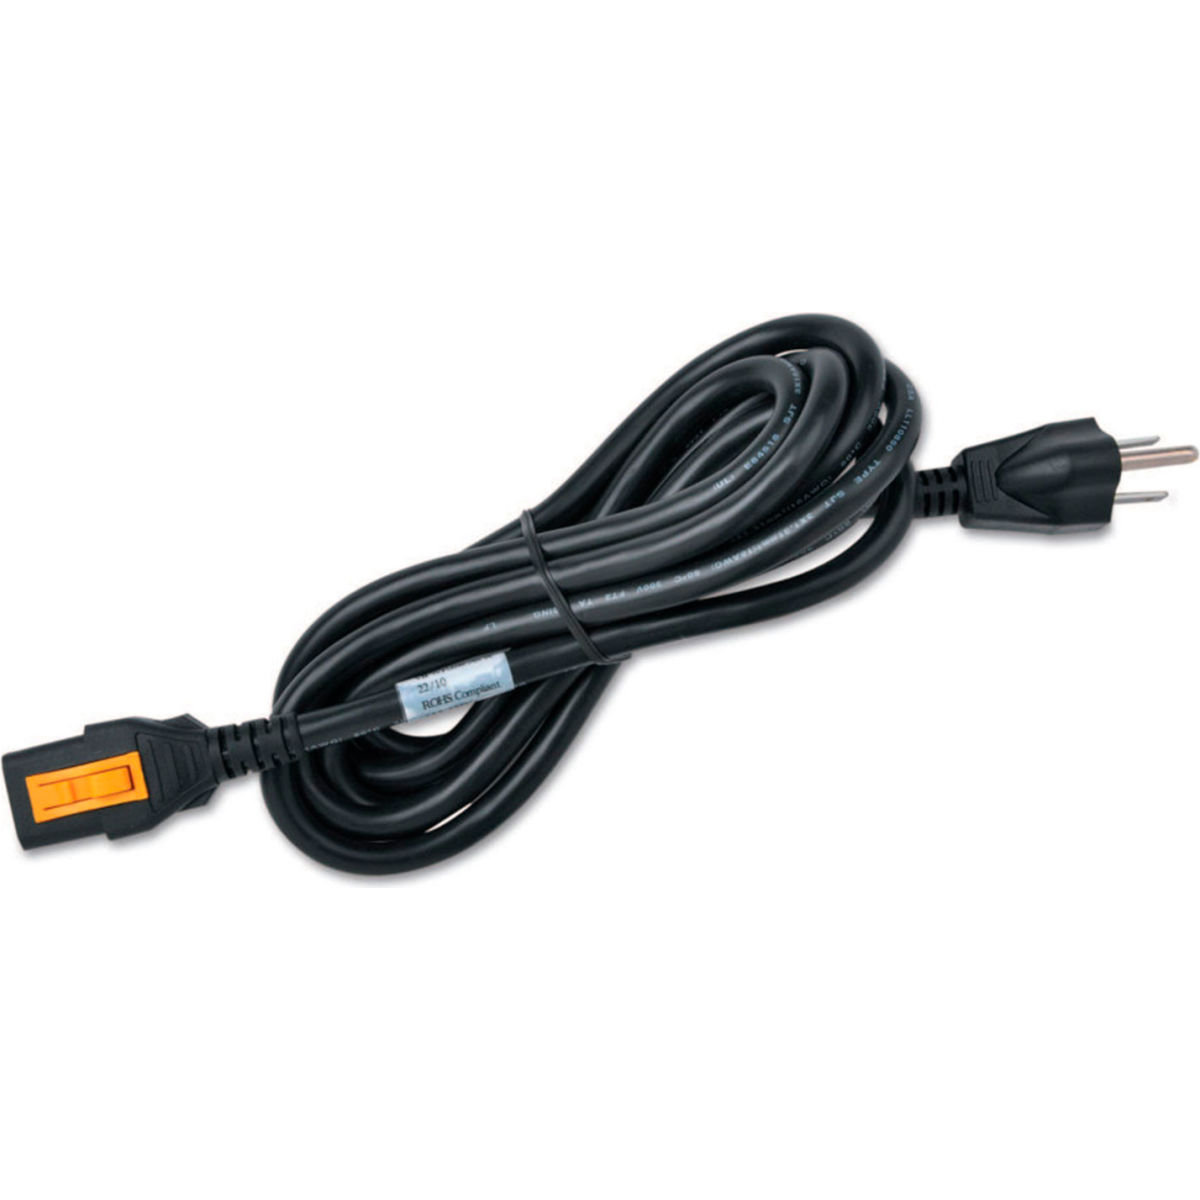 Picture of ORS Nasco B2248609 Repair Part - Locking Power Cord for Dry Rod Portable Ovens